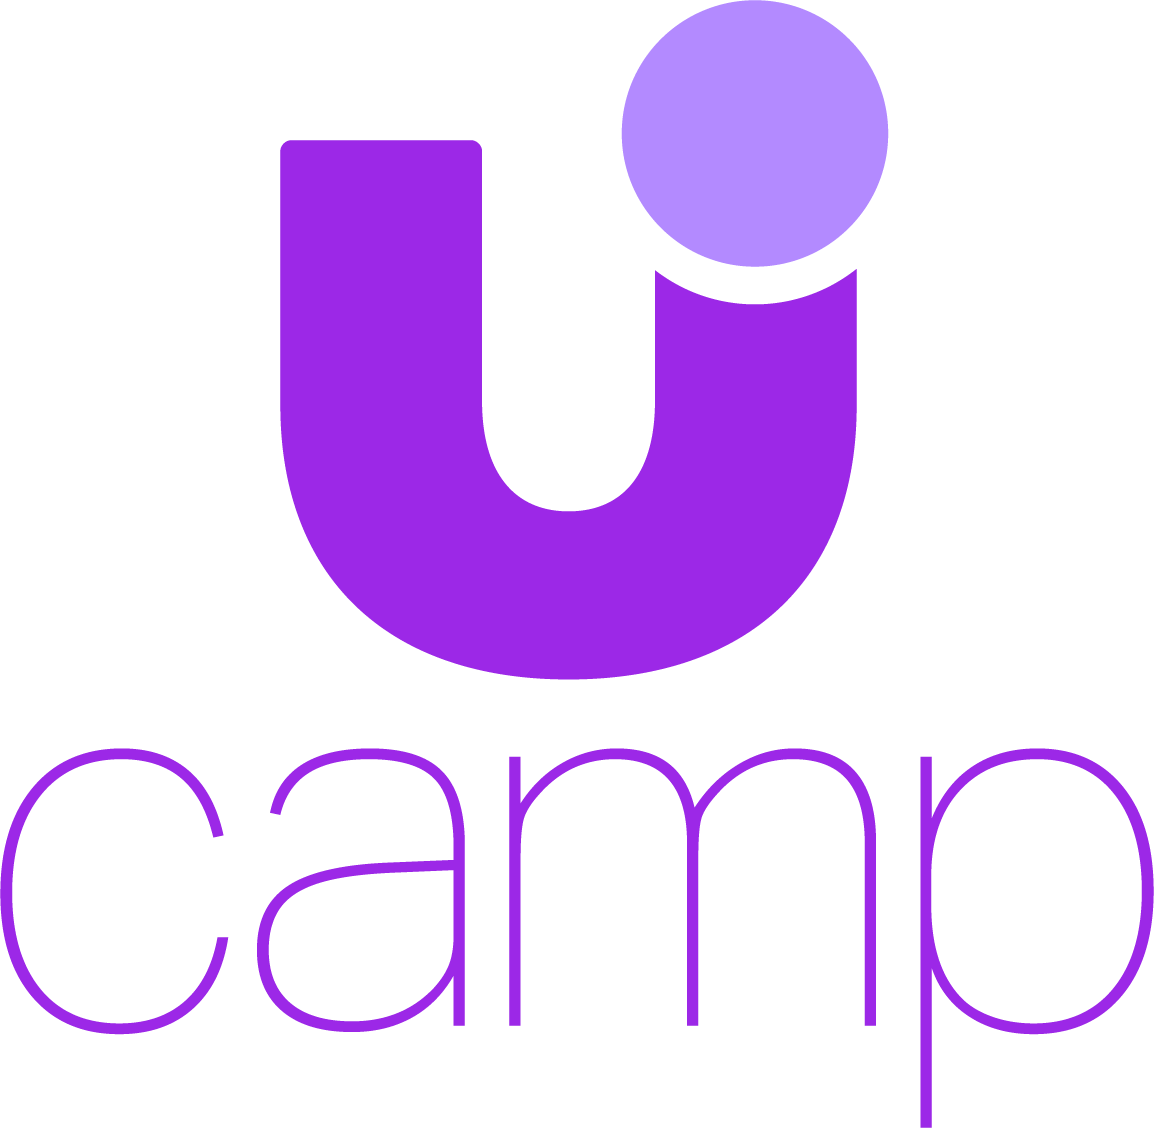 UCampApp: An App for Organizing and Finding Summer Camps